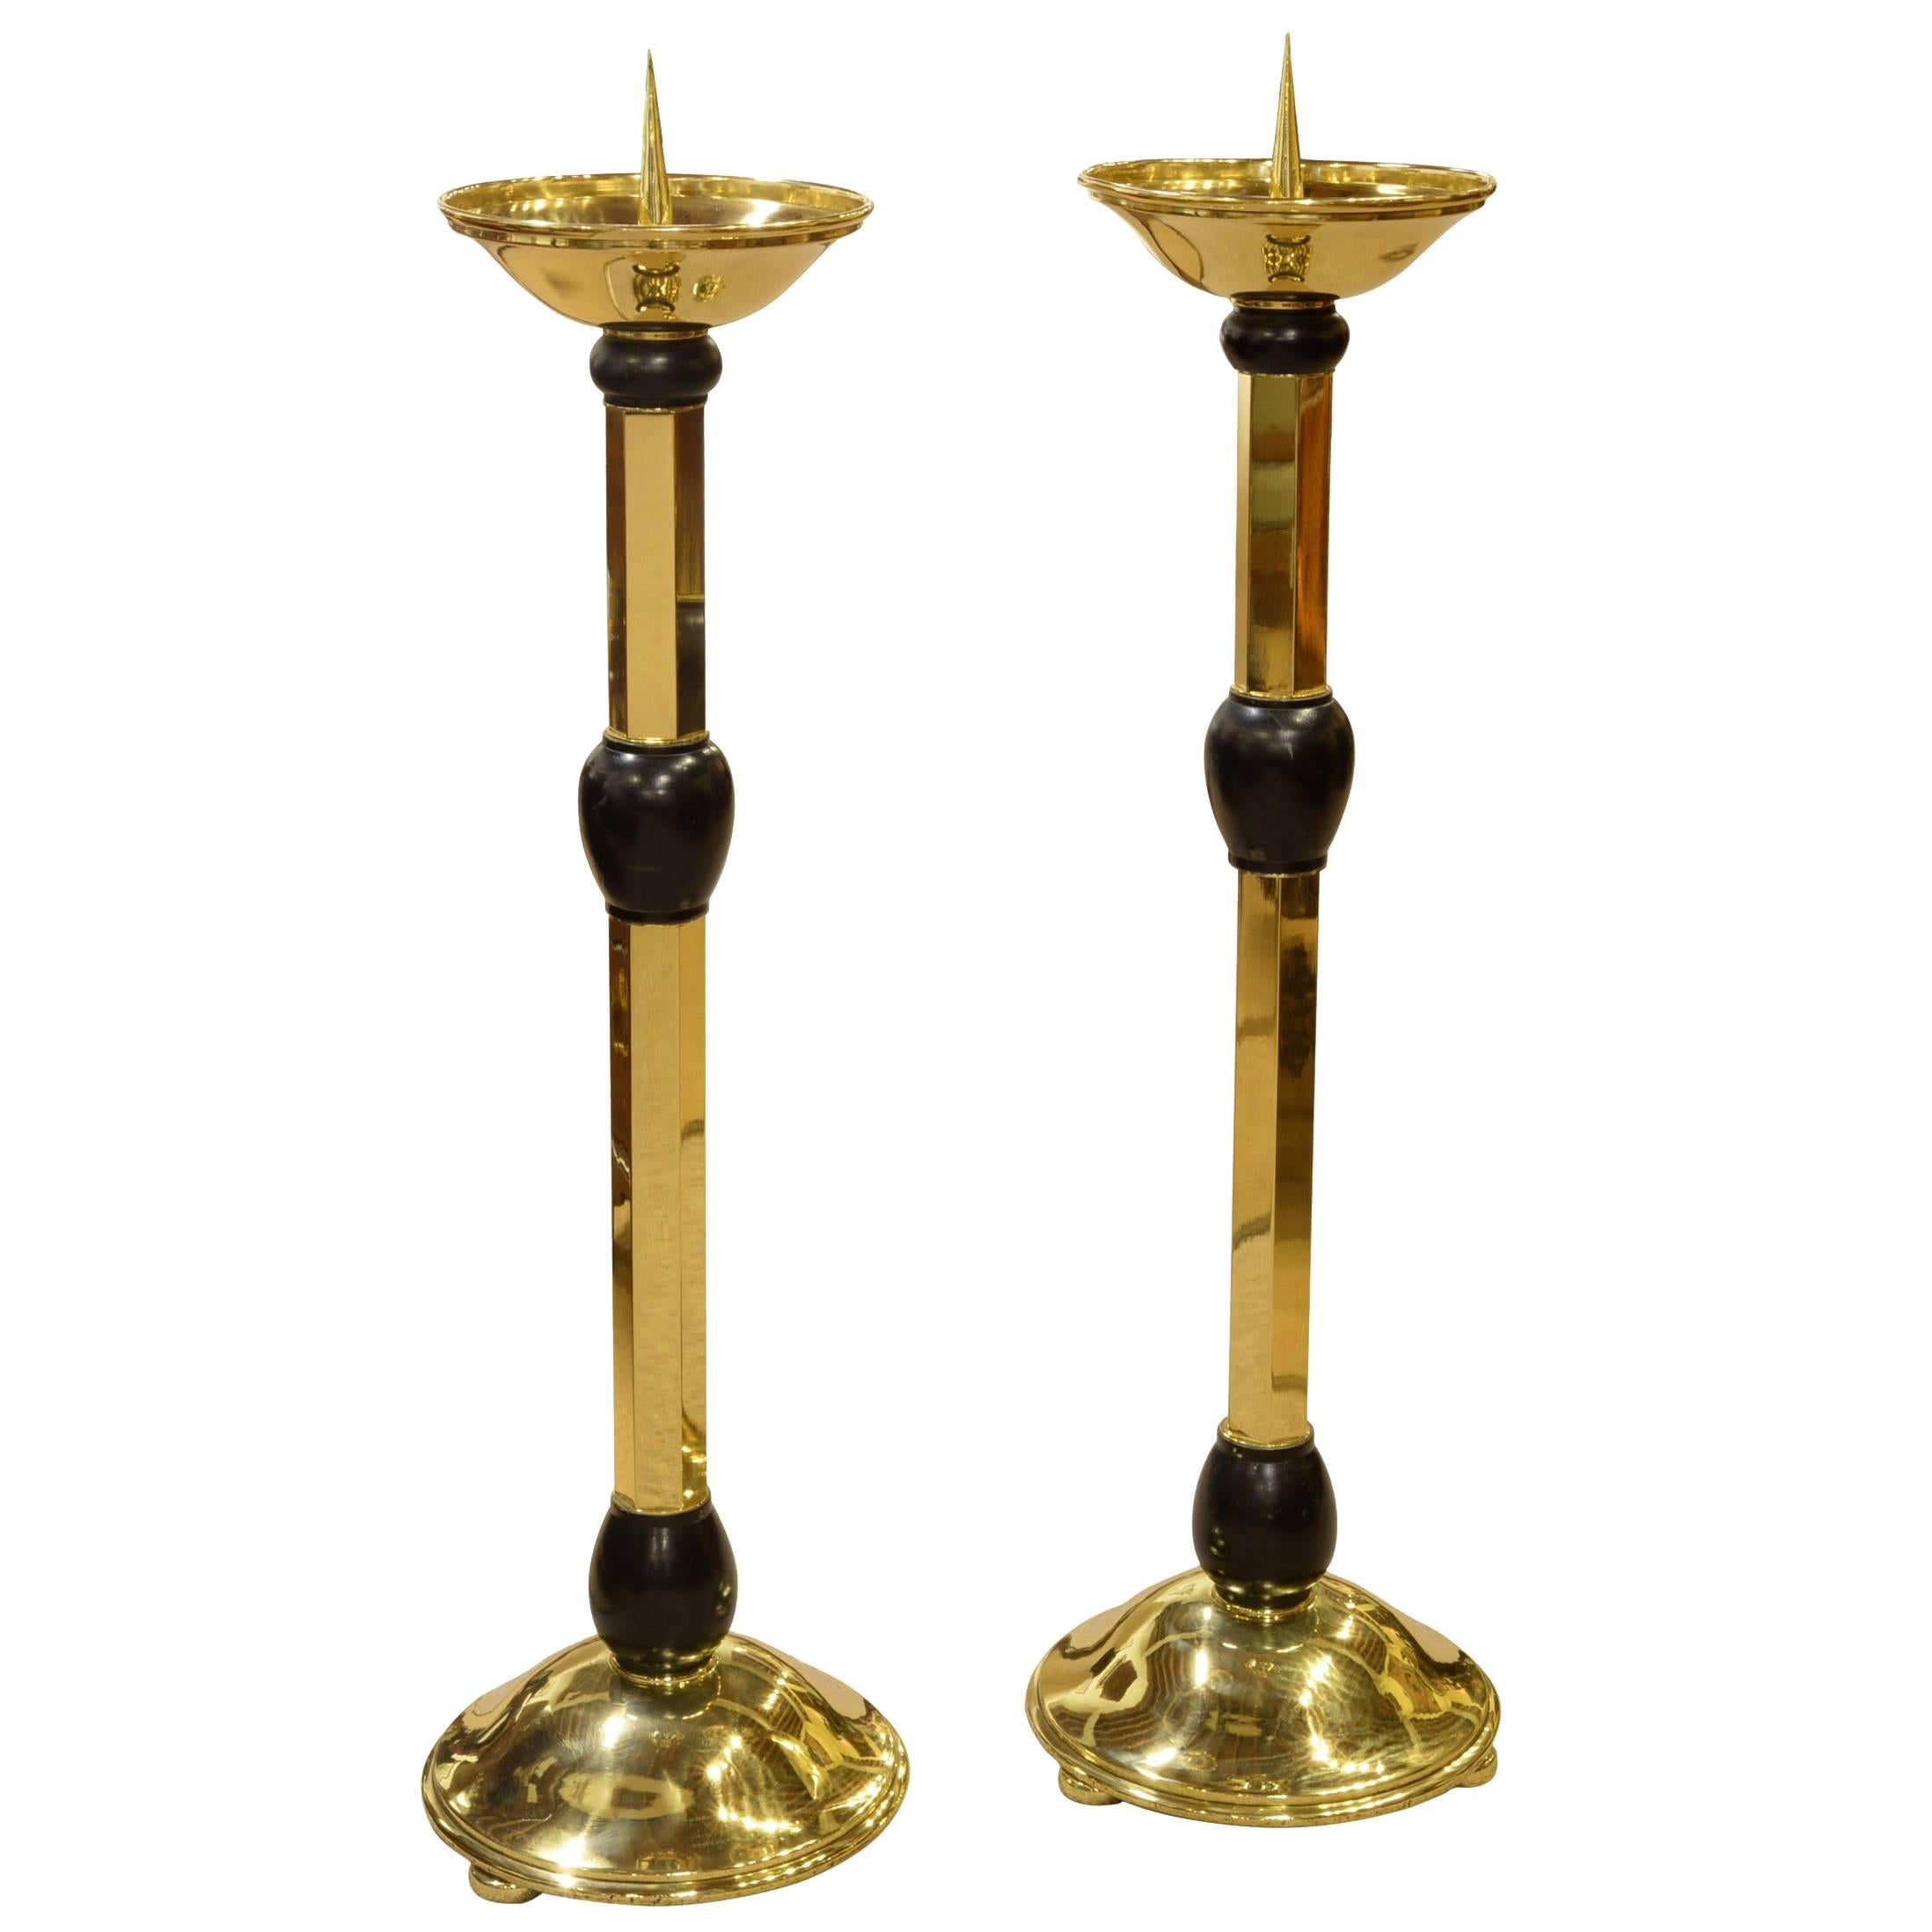 Pair of Lacquered Brass Candlesticks